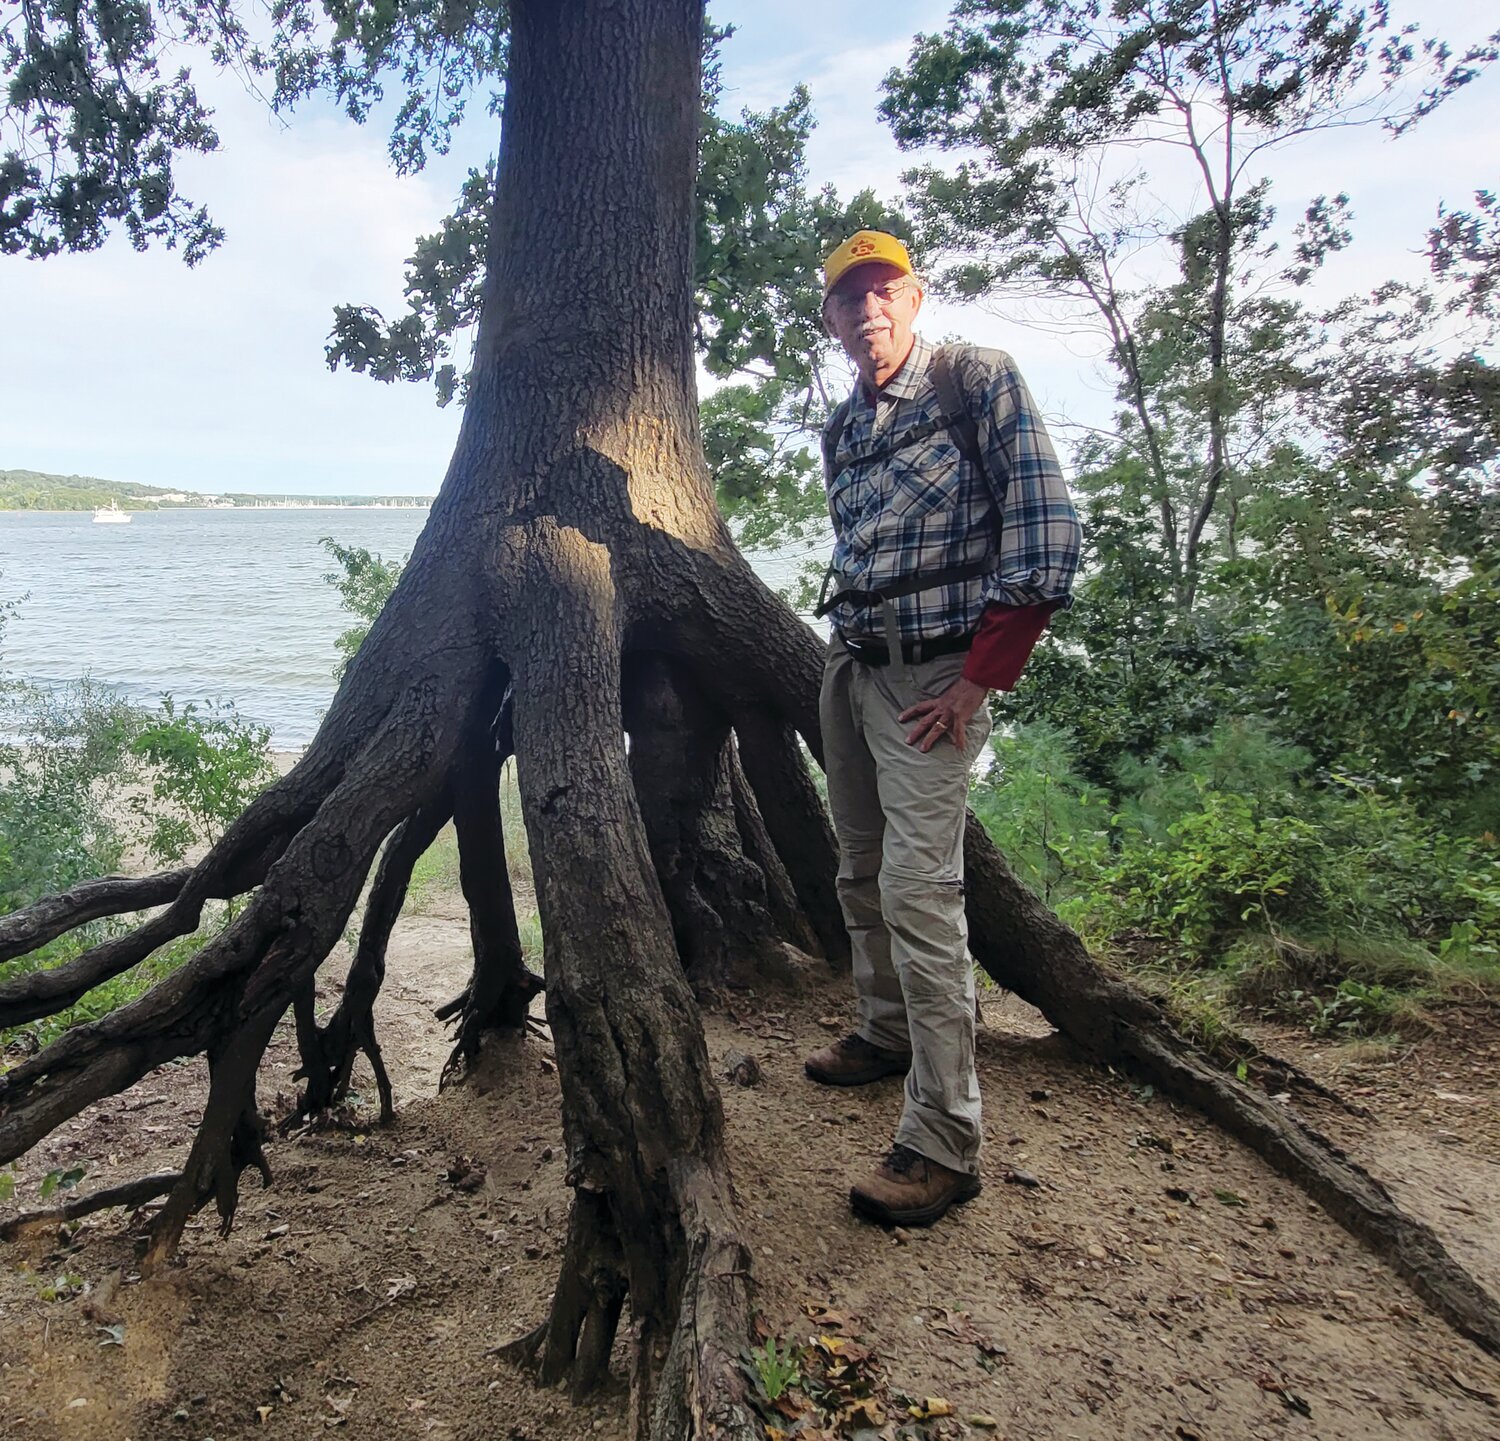 SURVIVING EROSION: John Kostrzewa stands by a beautiful survivor of erosion along the shoreline while walking a at Goddard State Park. The ex-newspaperman finds salvation in the woods on long walks. He shares his walking insights weekly with his column readers. Now, his columns have been compiled into a self-published book, “Walking Rhode Island: 40 Hikes for Nature and History Lovers with Pictures, GPS Coordinates, and Trail Maps.”